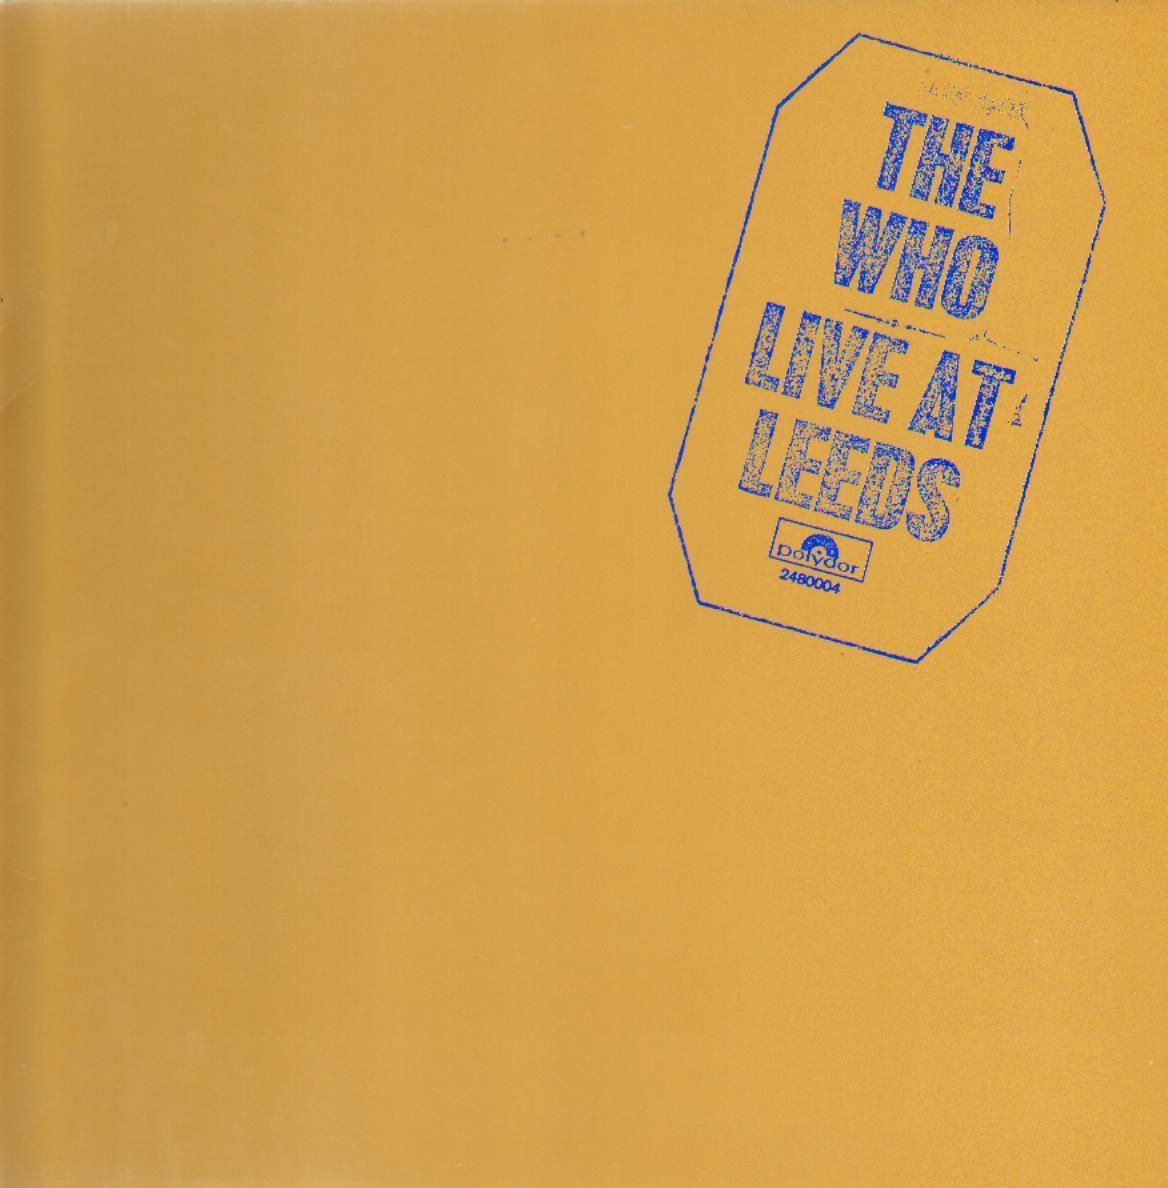 the-who-live-at-leeds-album-cover_1200x